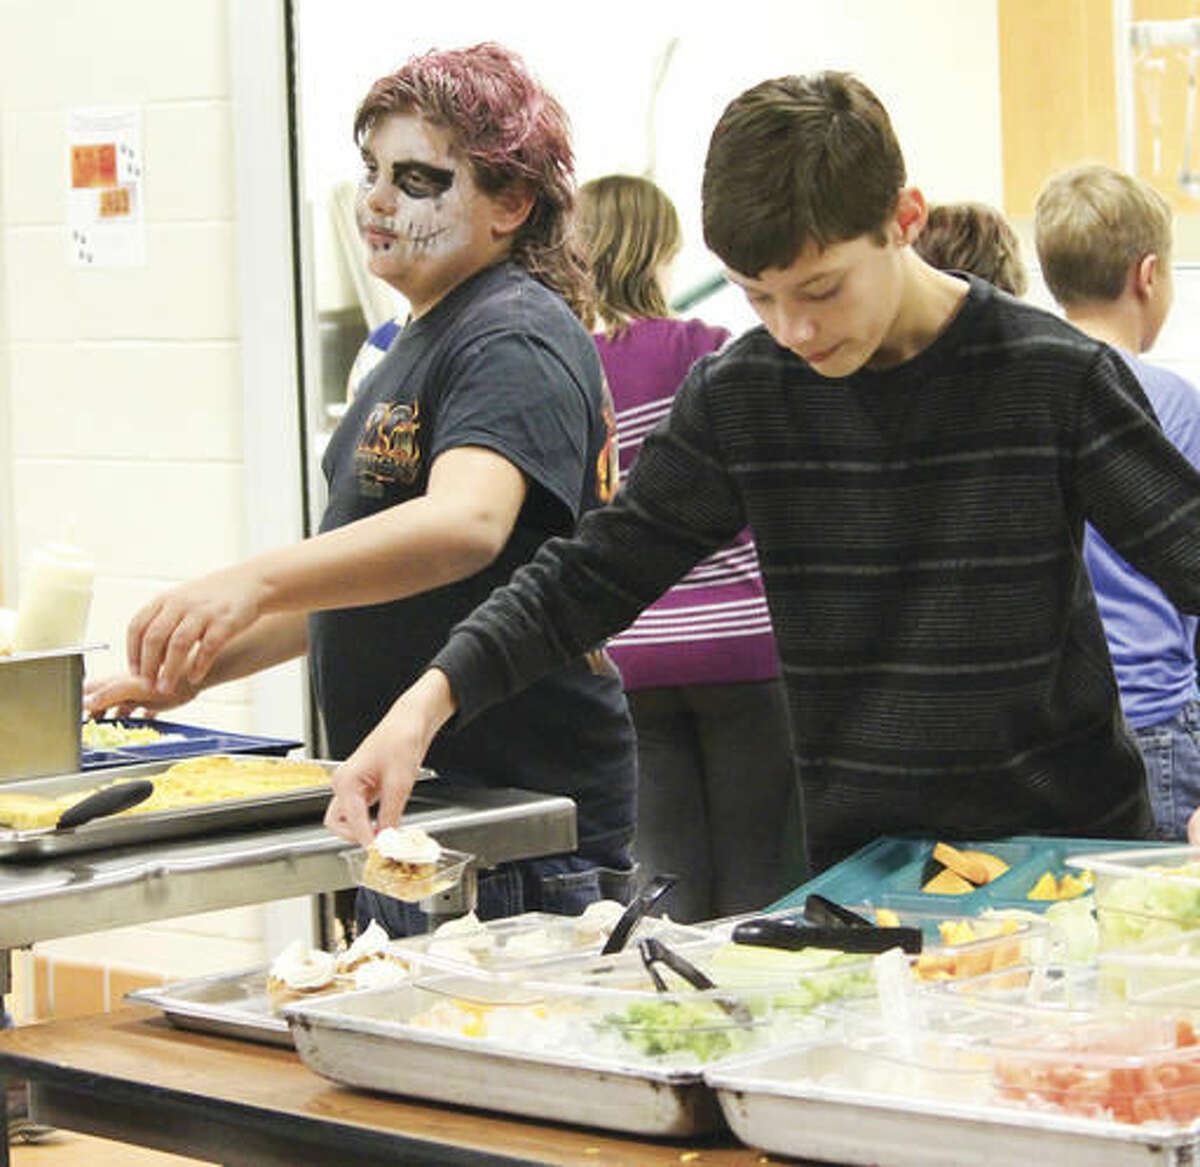 Brandon Rice, right, picks up an apple crisp from the Thermopolis Middle School lunch room. The apple crisp was made from apples picked by students in the farm to school program and served on Halloween. (Tesia Galvan/Northern Wyoming Daily News via aP)